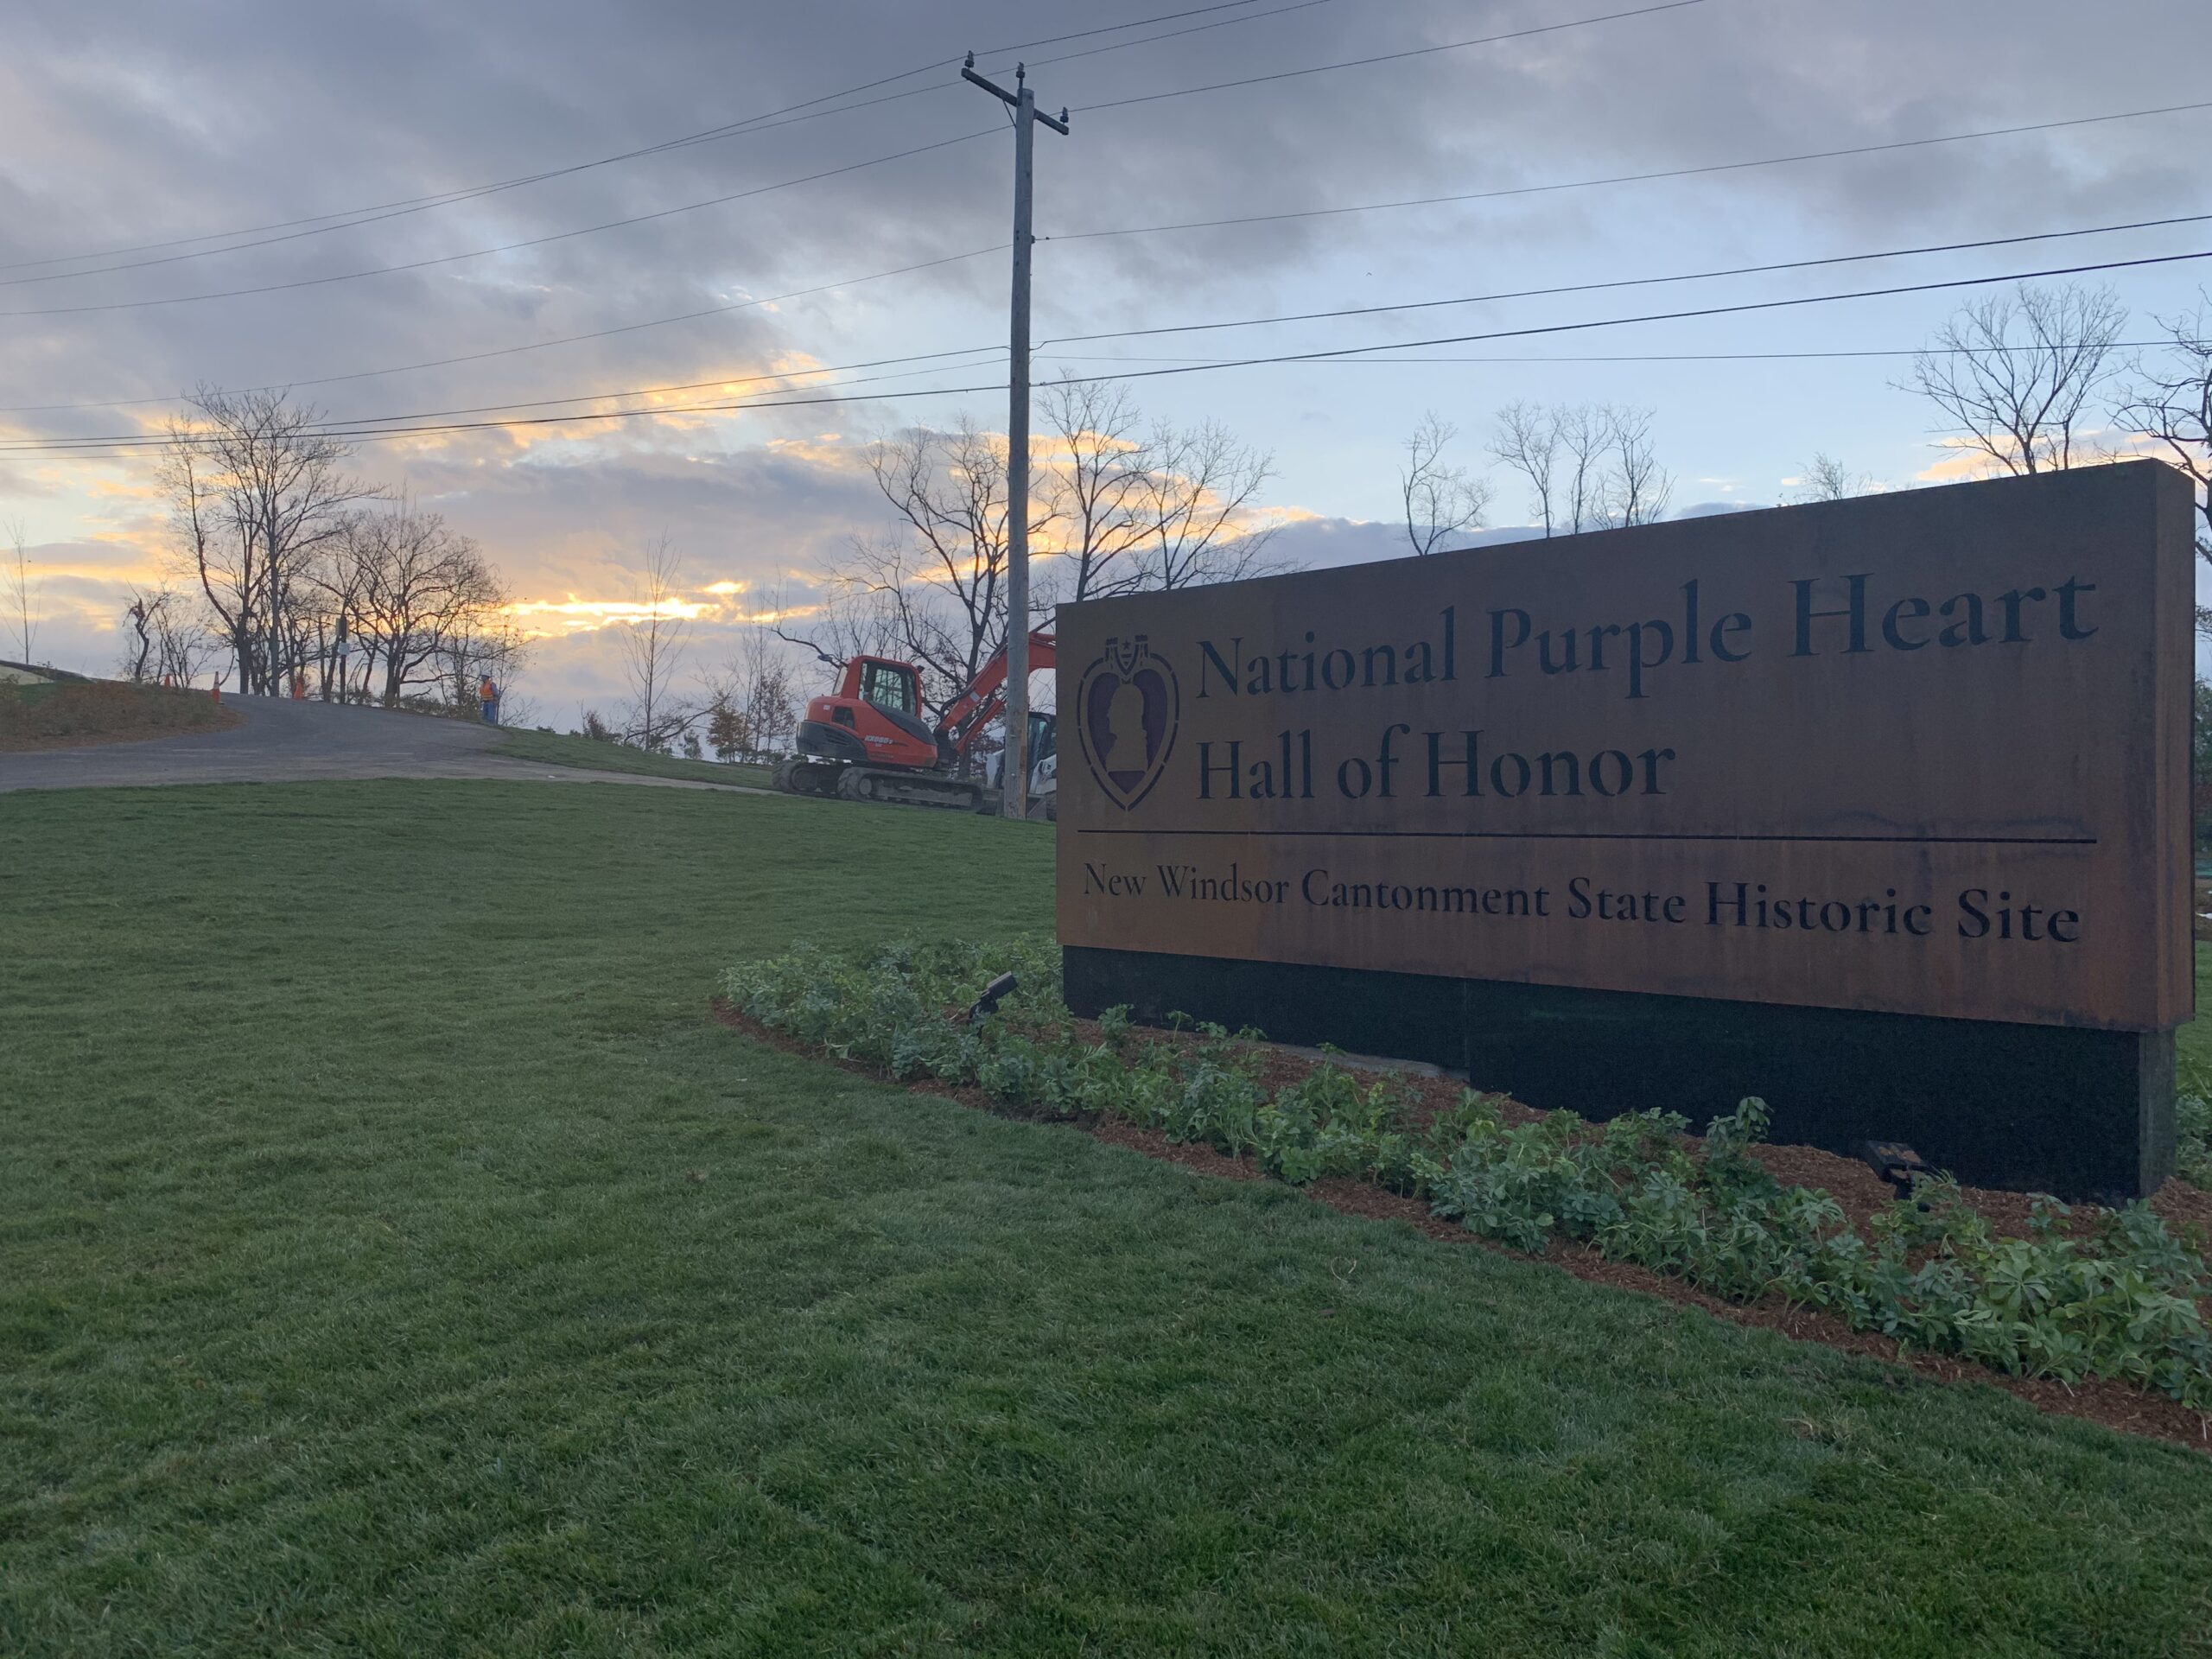 A sign for the National Purple Heart Hall of Honor with its brand information